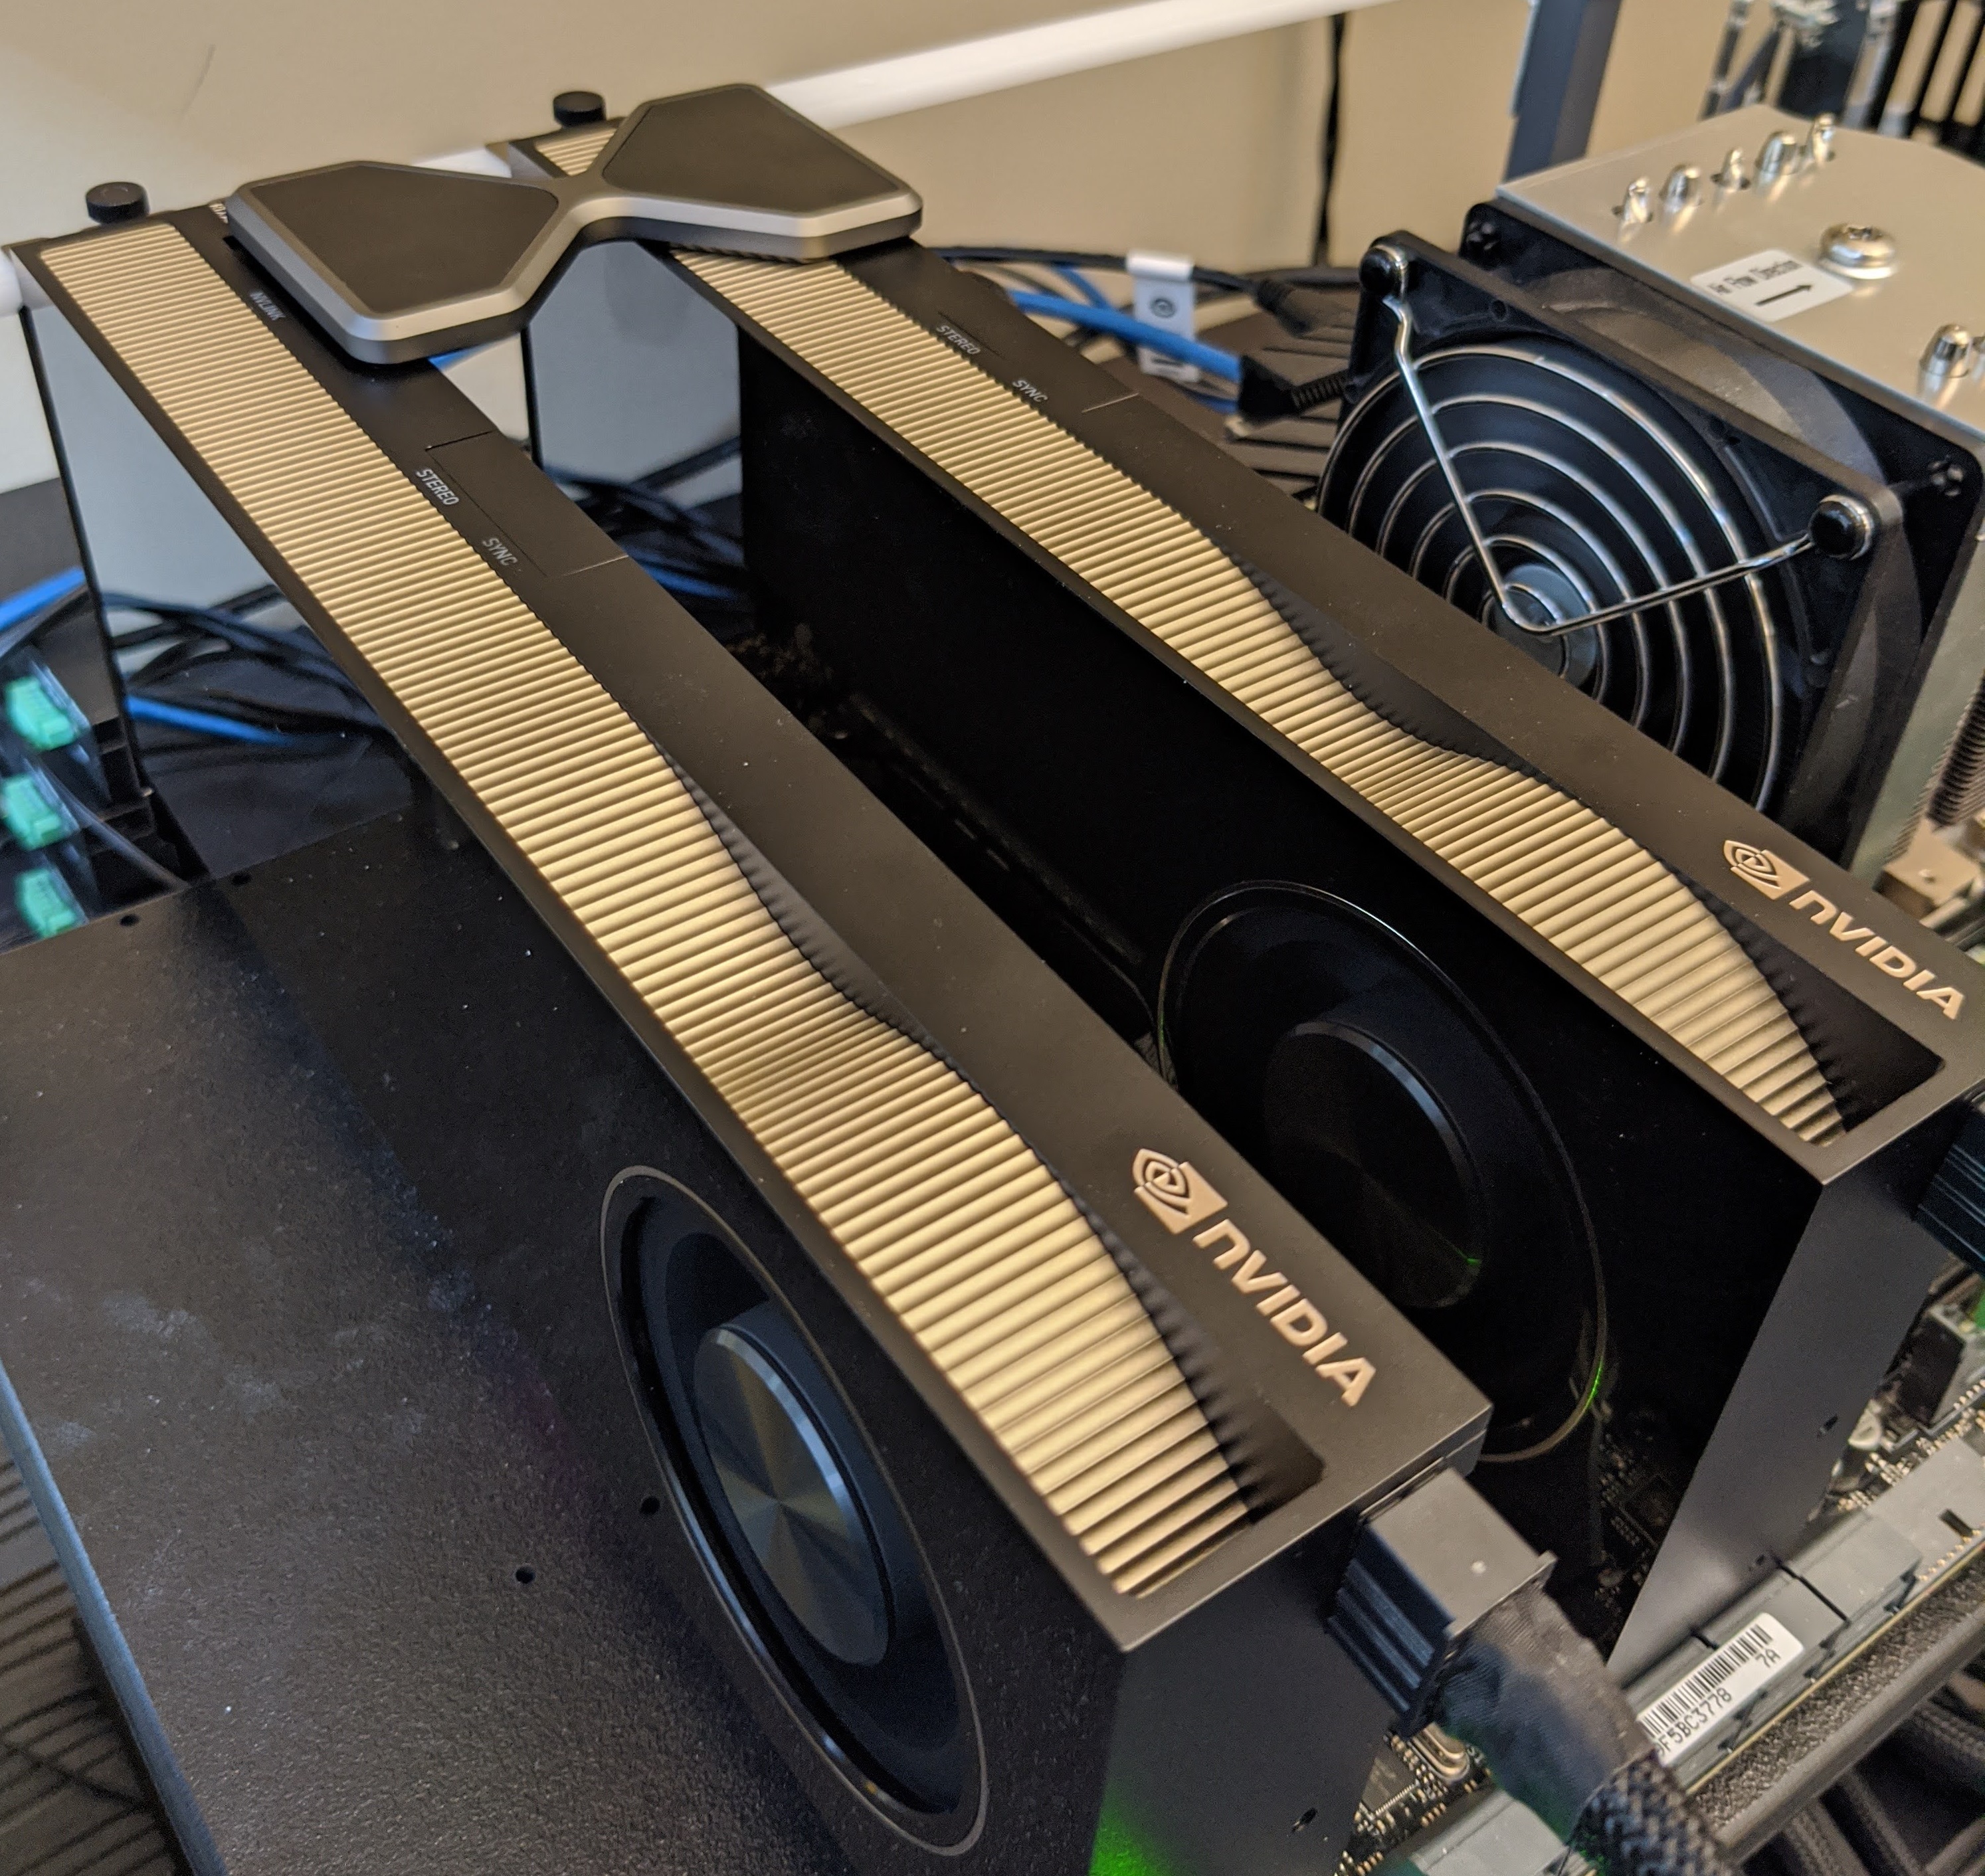 Dual NVIDIA RTX A6000 Video Cards Connected by a GeForce RTX 3090 4-slot NVLink Bridge